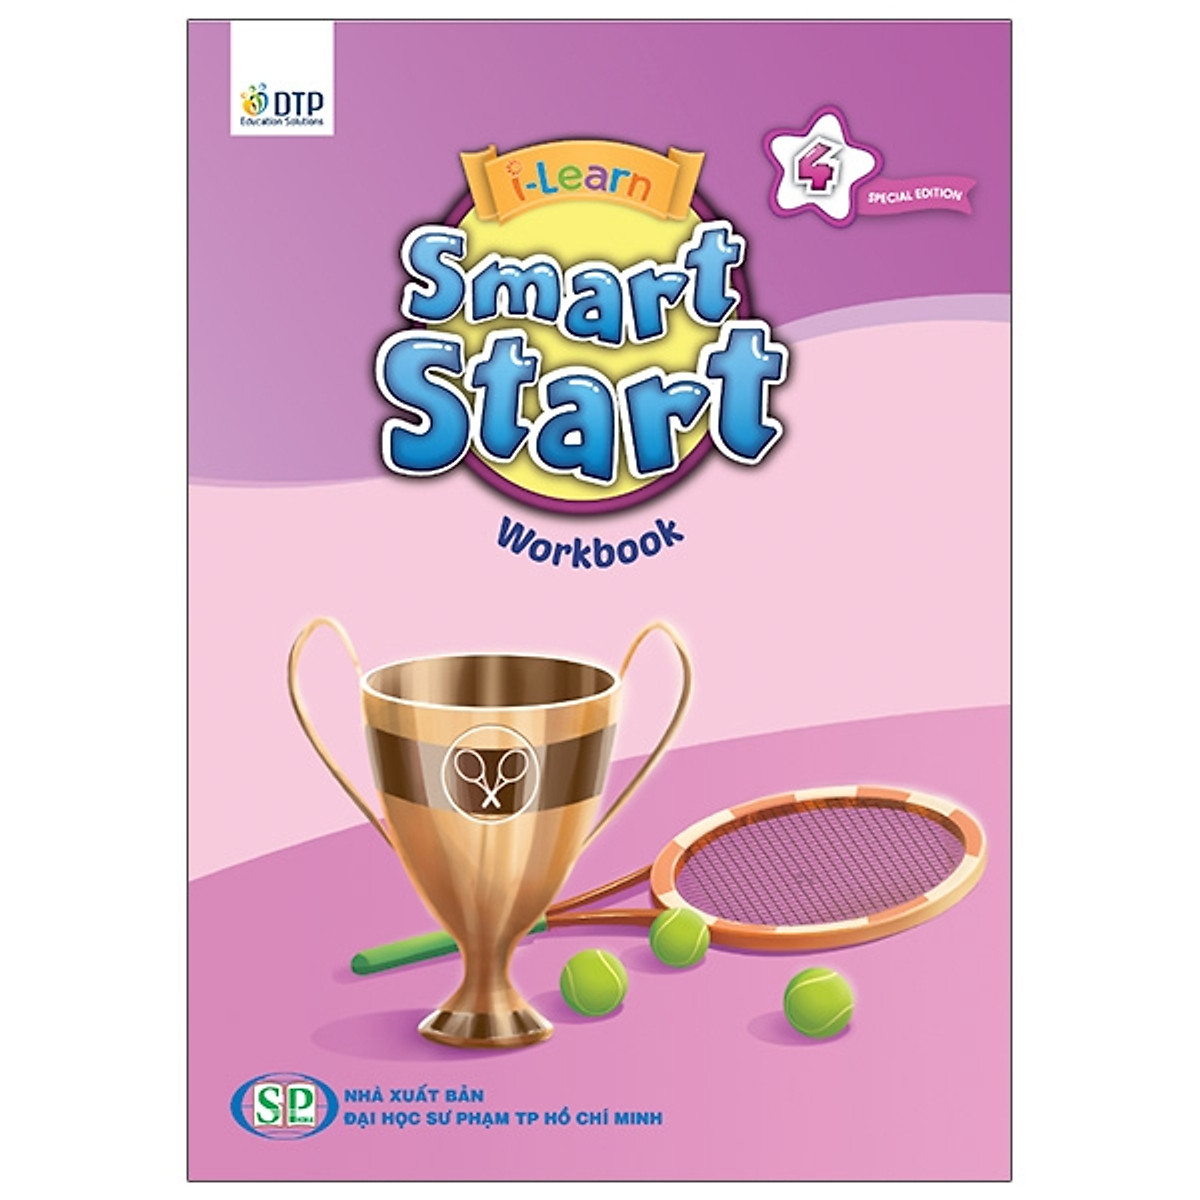 I-Learn Smart Start 4 Workbook Special Edition